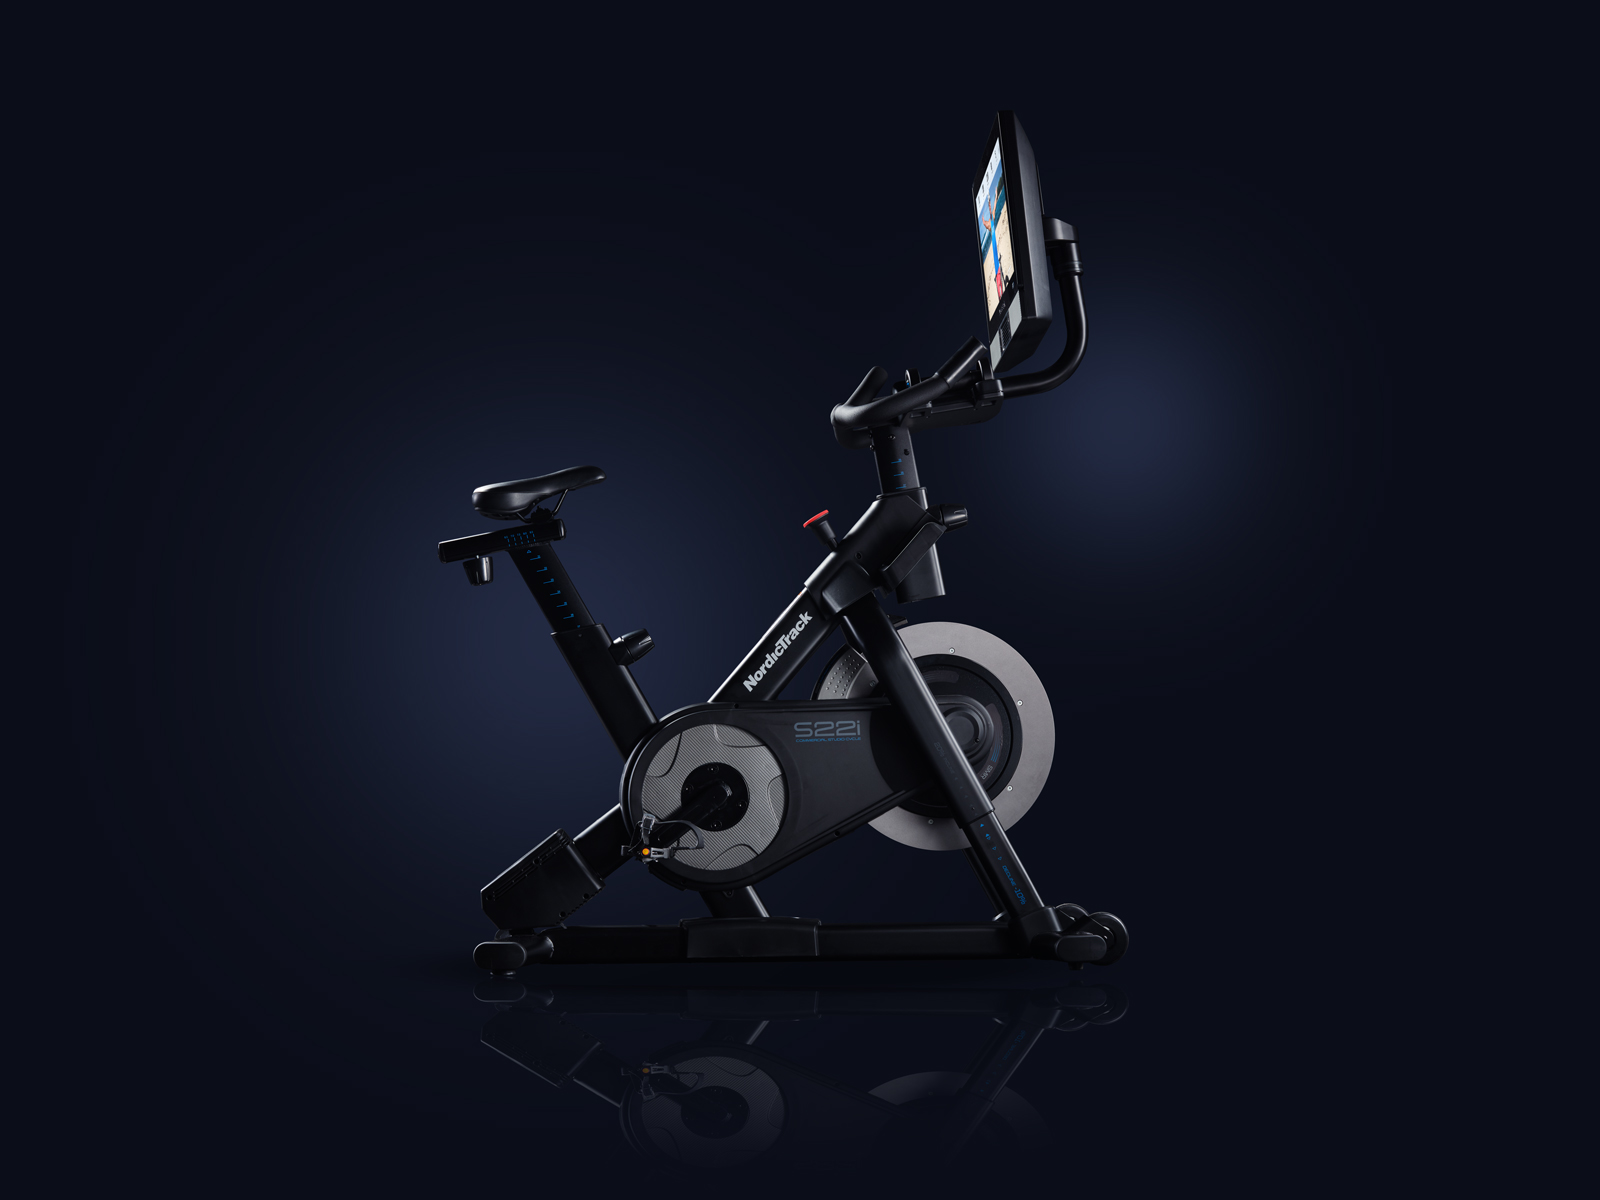 Profile image of the bike with the screen being a profile shot as well. All on a dark blue gradient background.